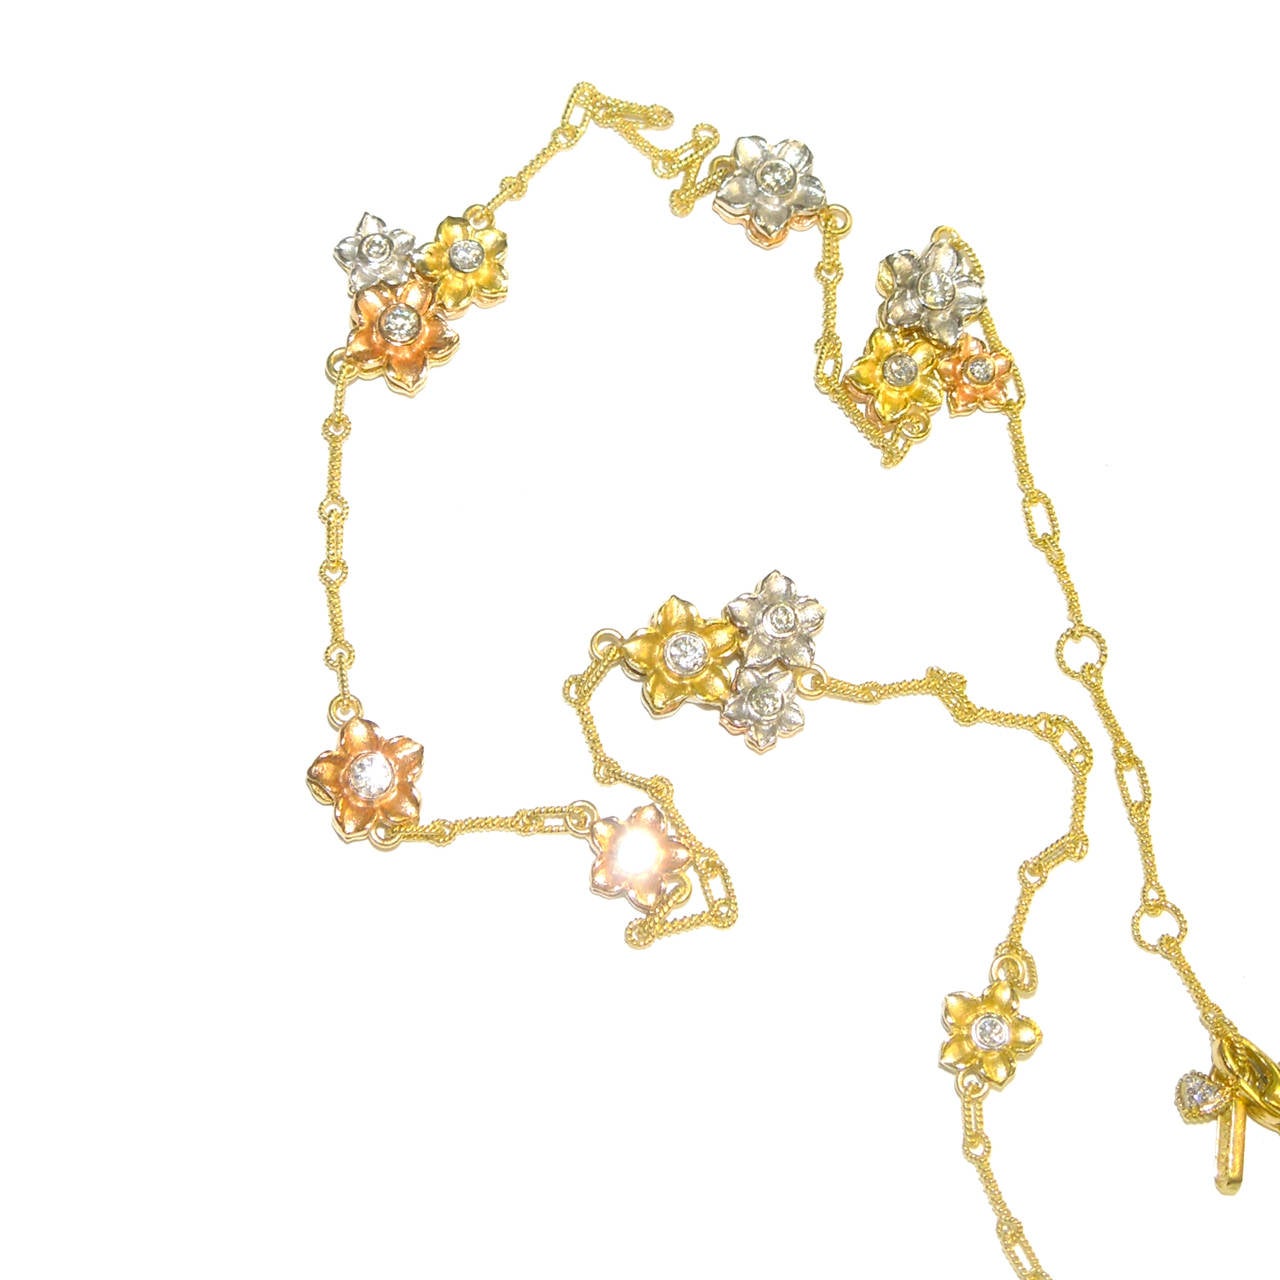 18K Gold Necklace with double sided Diamond bezels

Flower bezels are done in Yellow, White & Pink Gold and diamonds are double sided

Chain used is done with 18K Gold Hand Twisted wires

1.77 ct.'s of G Color, VS Quality Diamonds

Has three